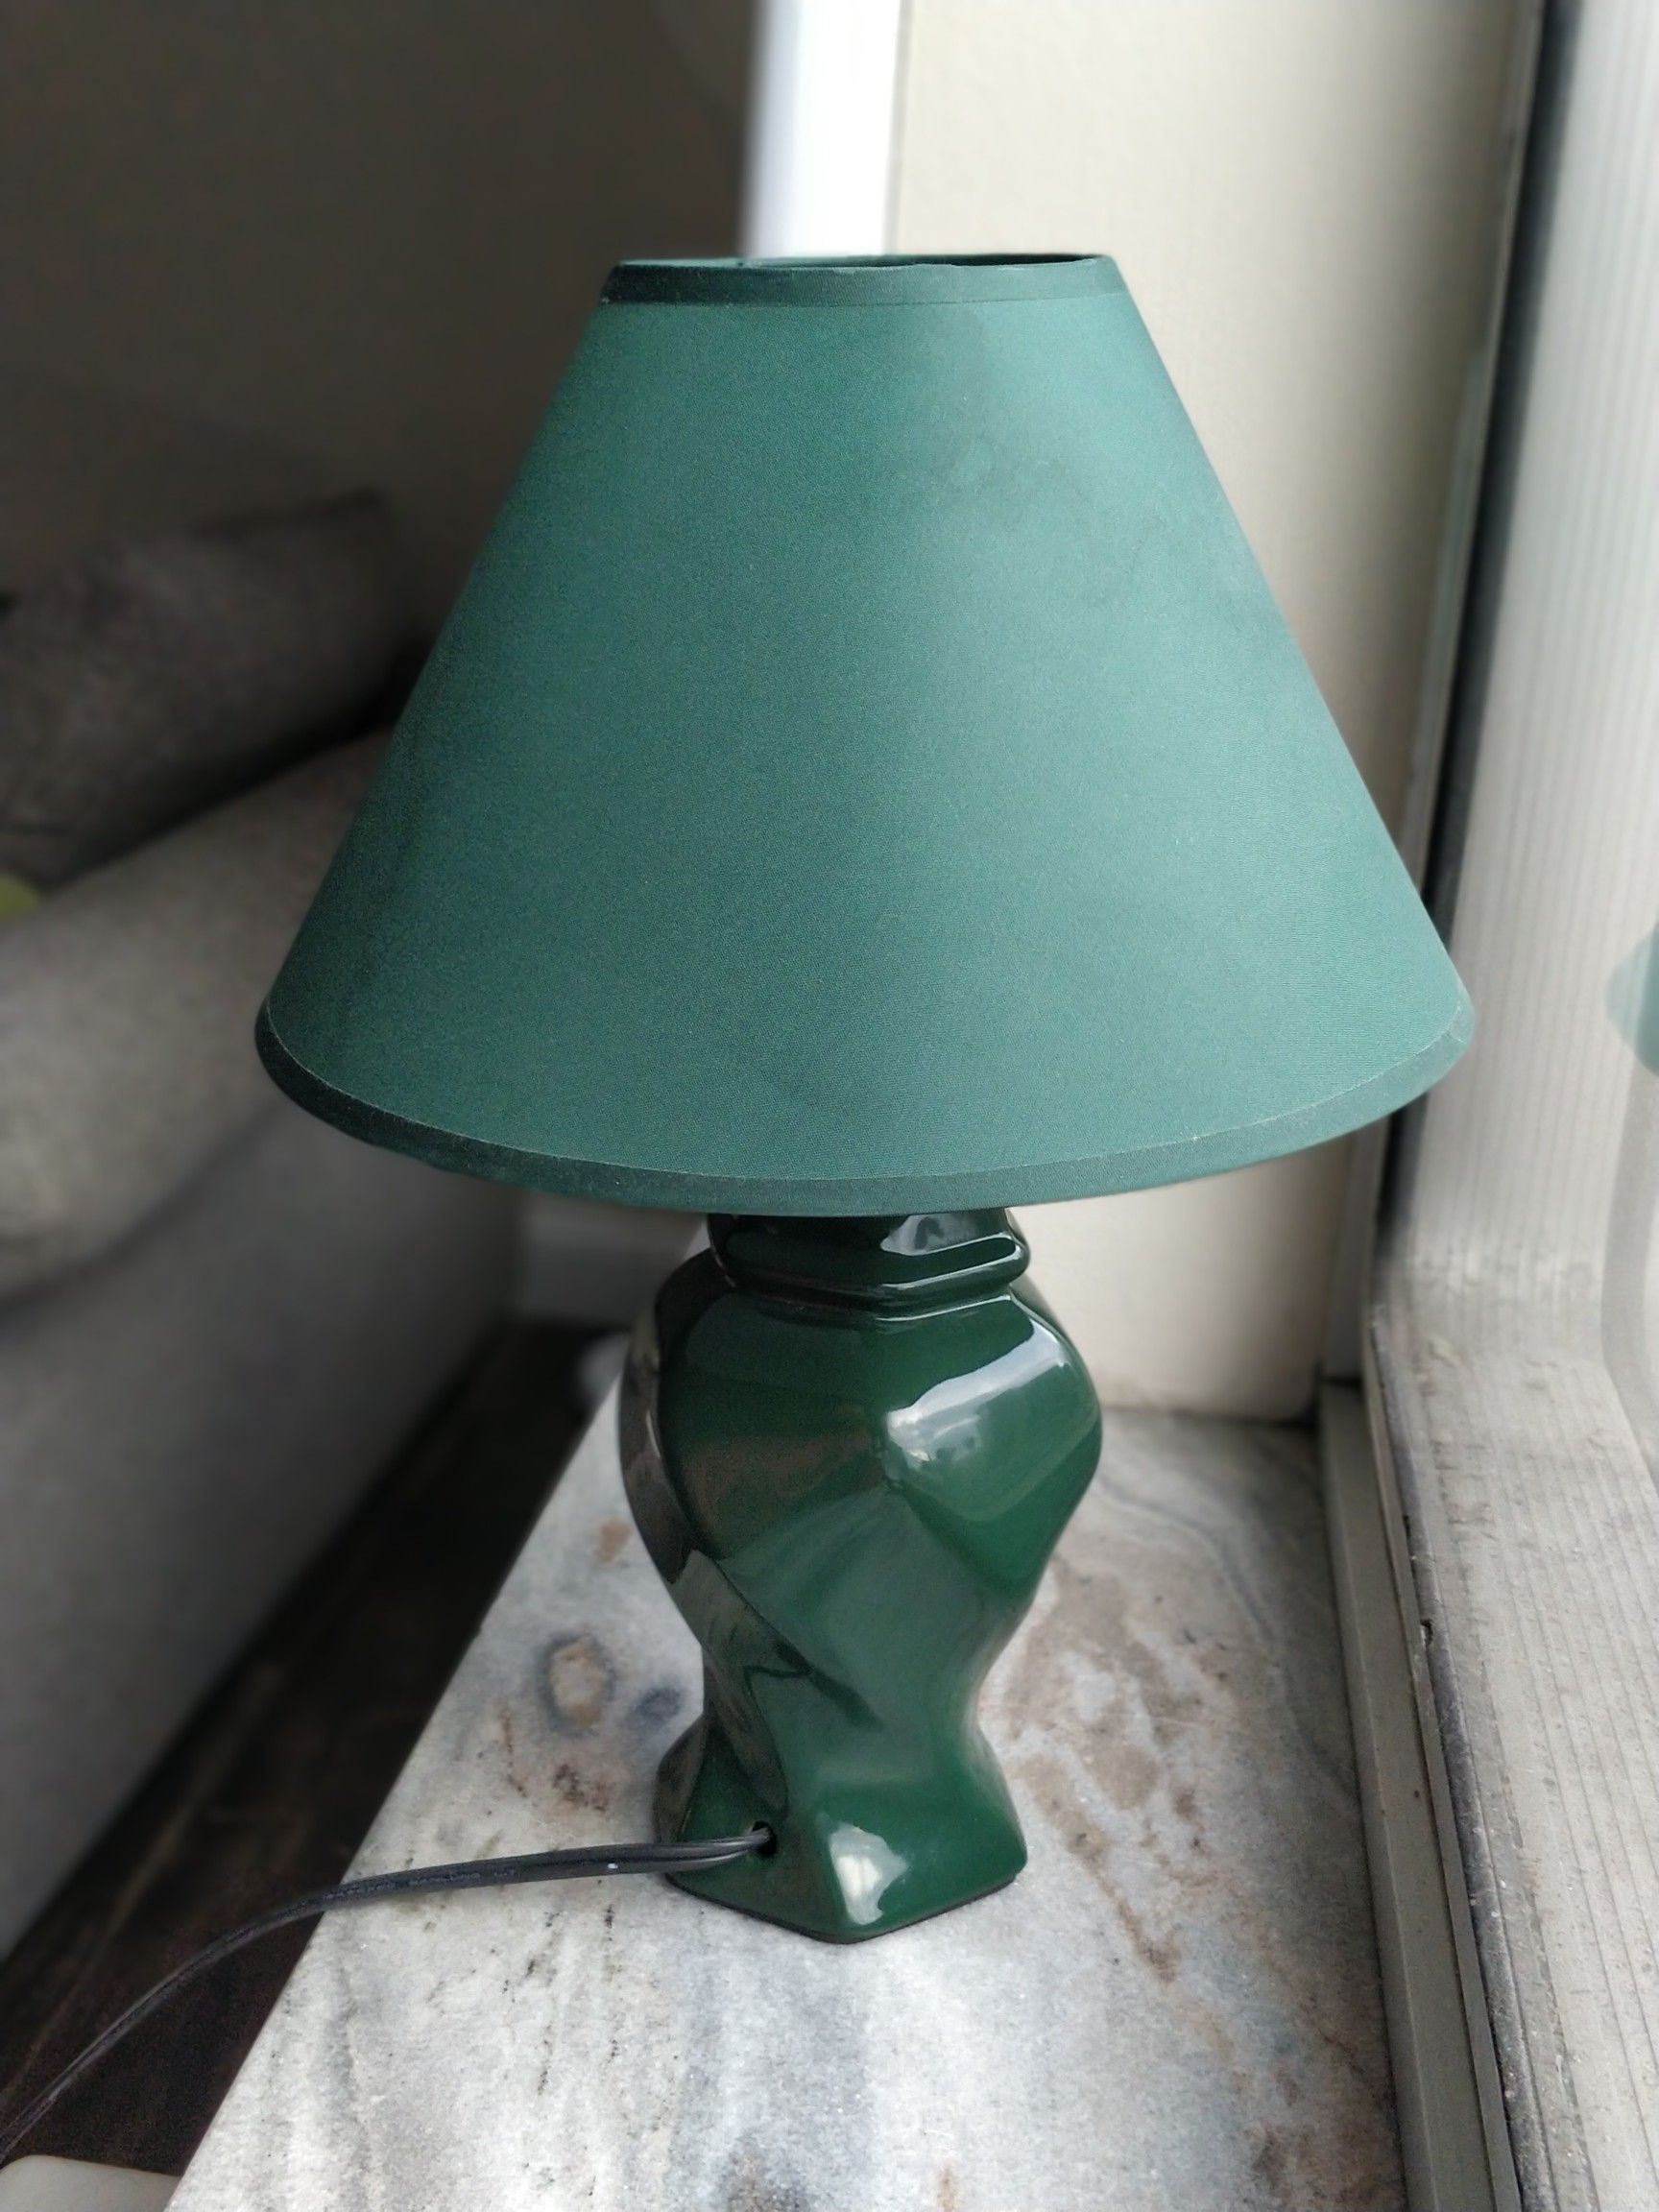 Small green lamp for cheap!